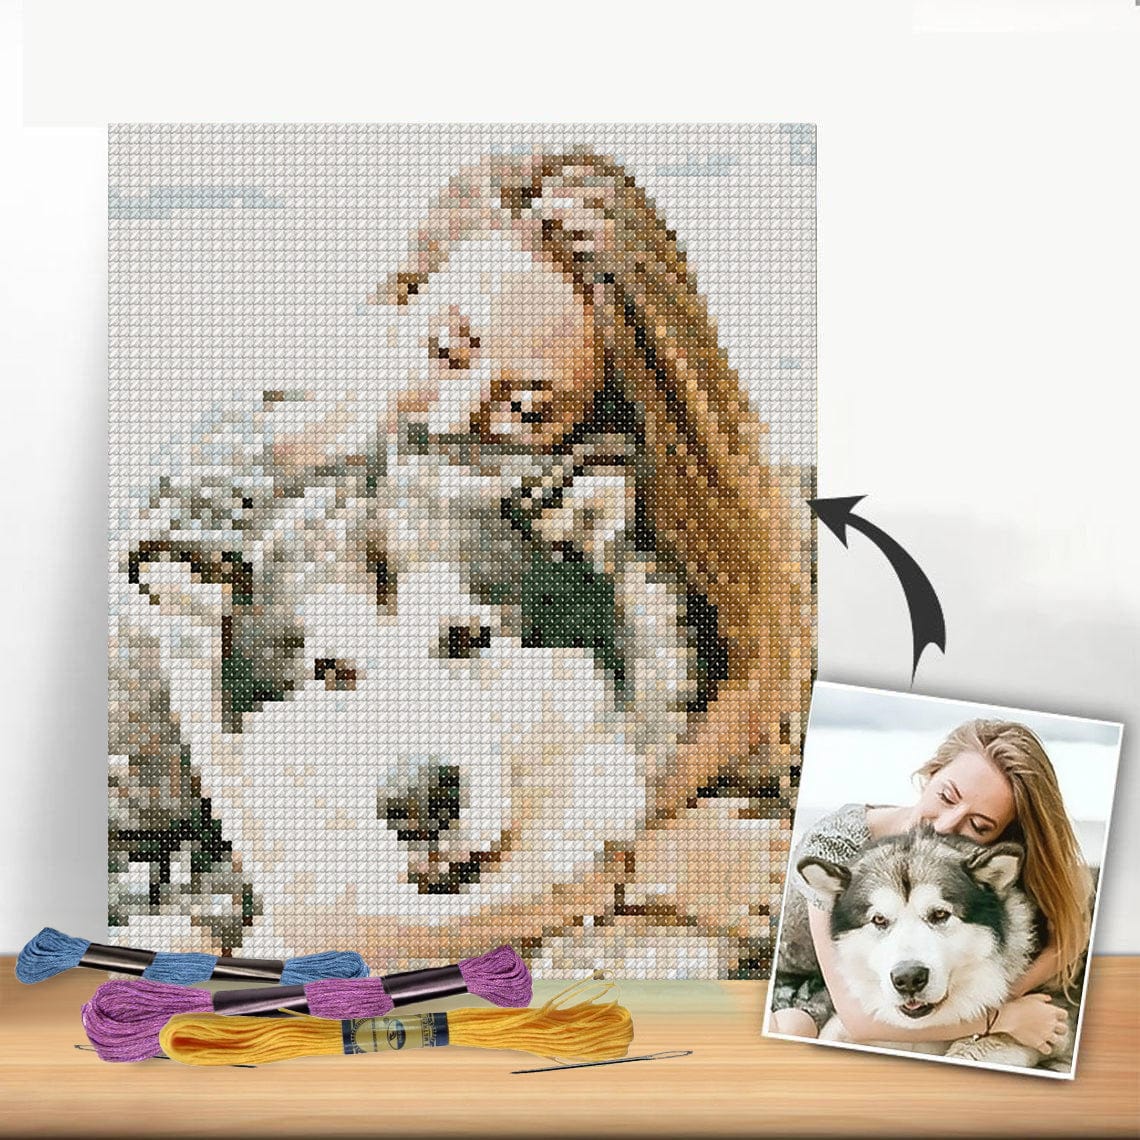 Cross Stitch | Husky - Siberian Husky With Scarf Reclining On The Floor - Cross Stitched